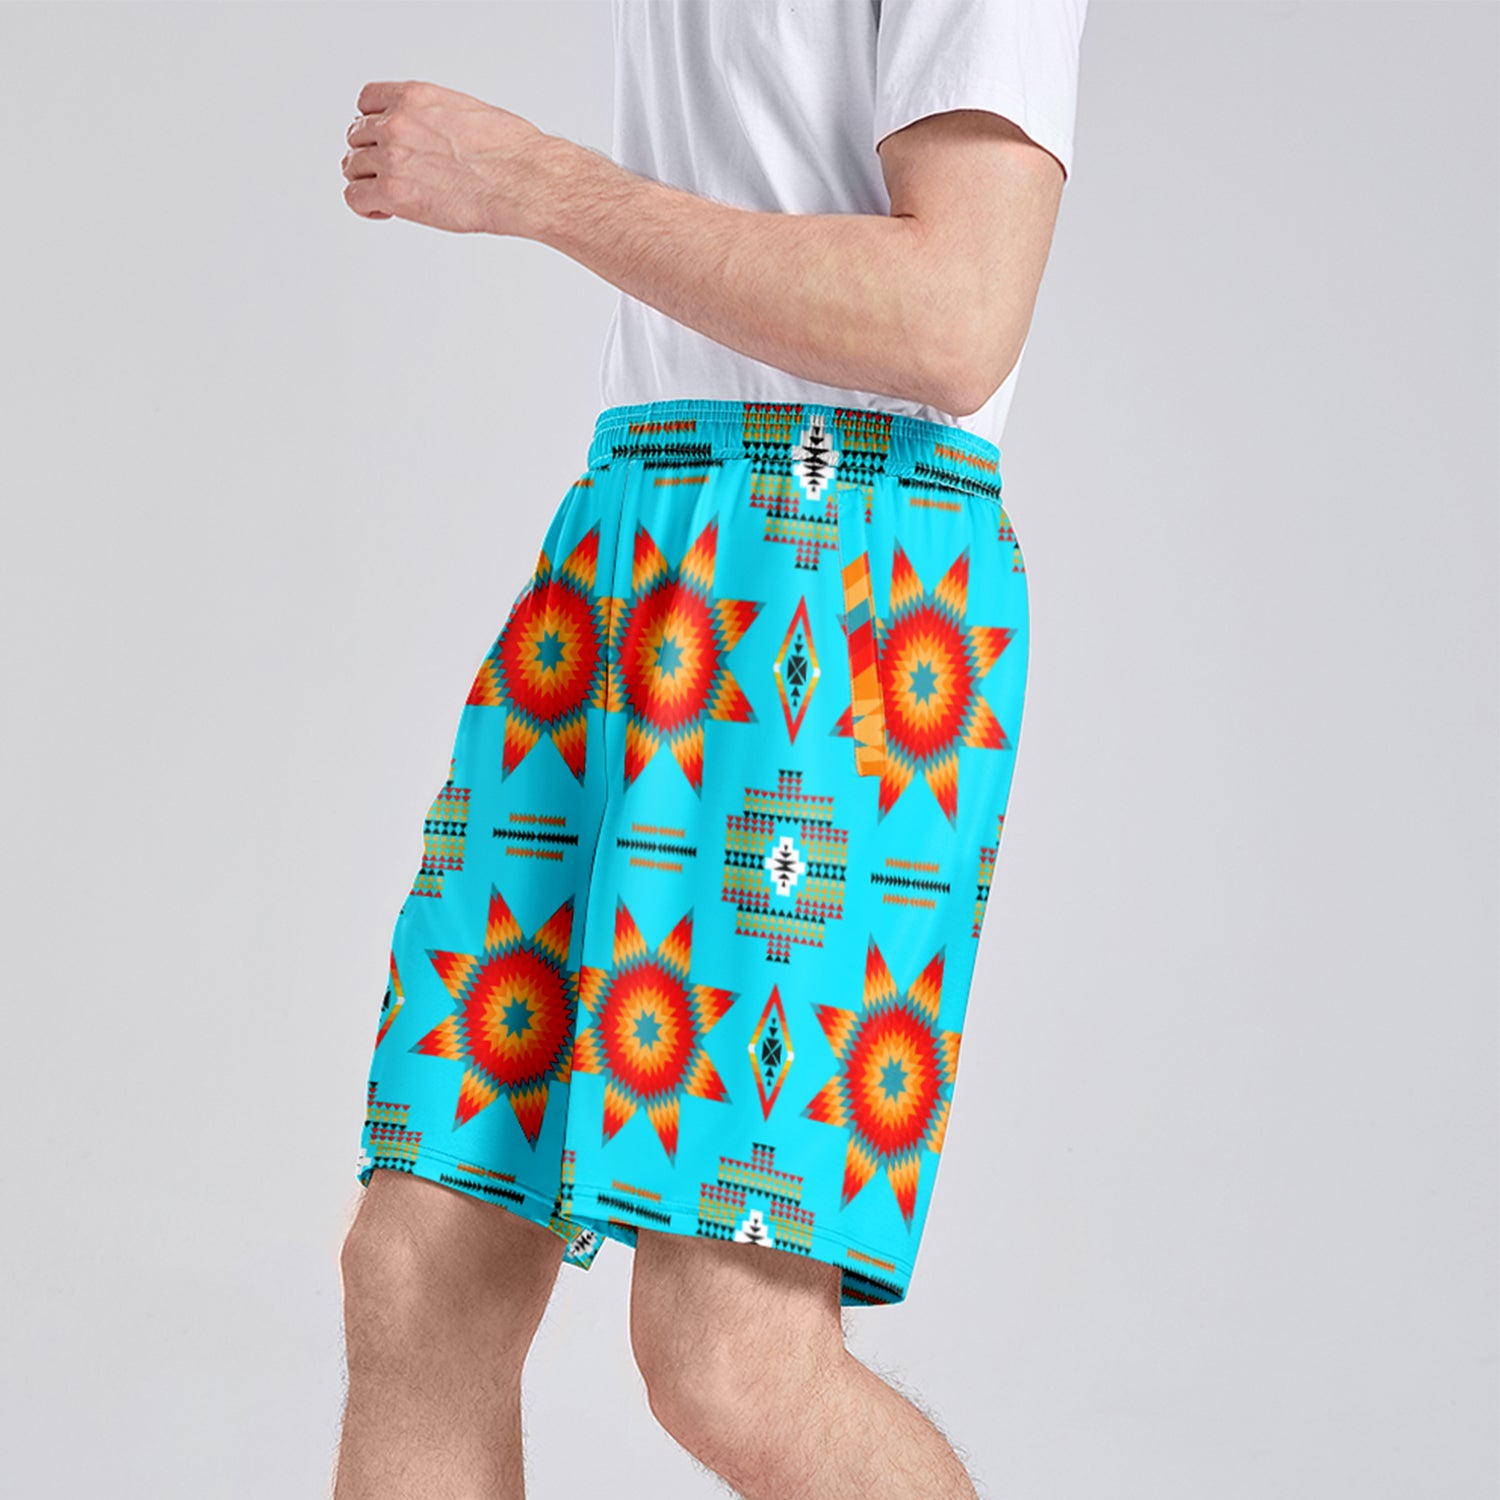 Rising Star Harvest Moon Athletic Shorts with Pockets